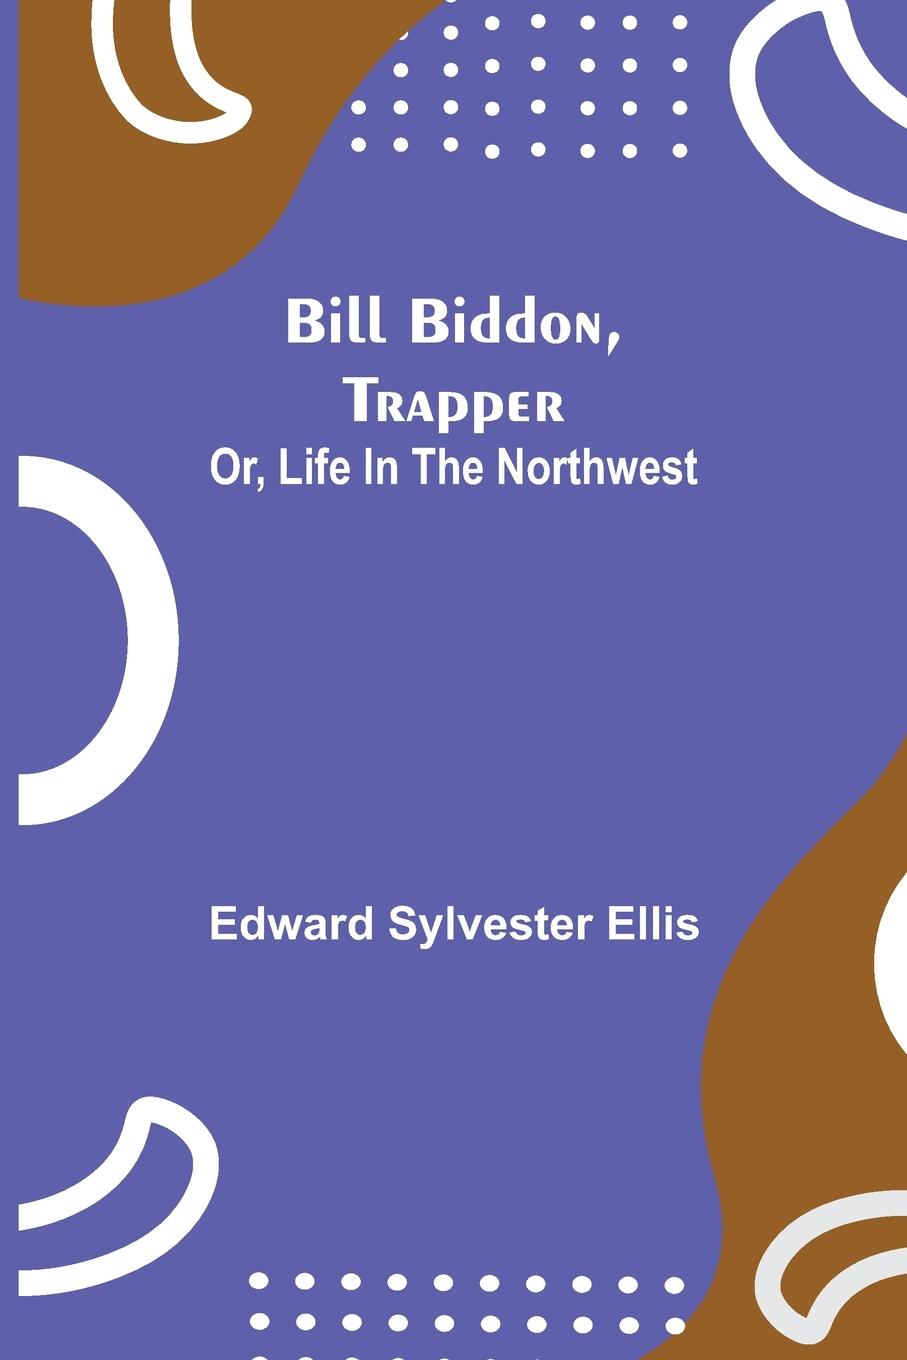 Book Bill Biddon, Trapper; or, Life in the Northwest 